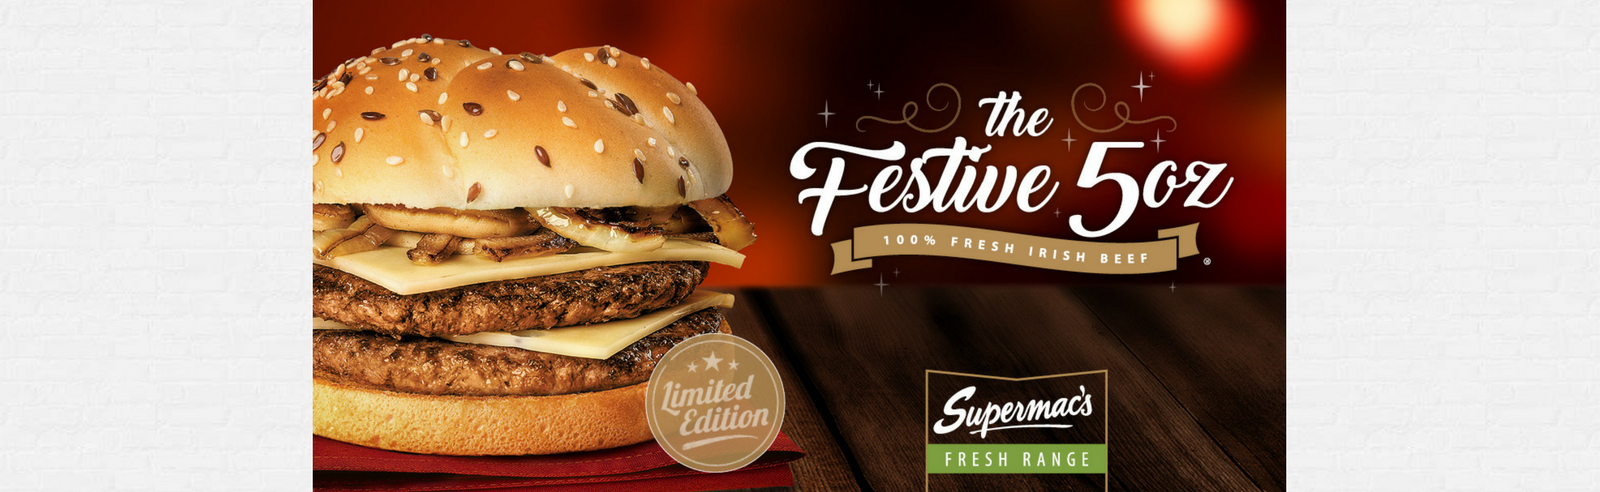 Supermac’s Limited Edition Festive 5oz Burger is Back!